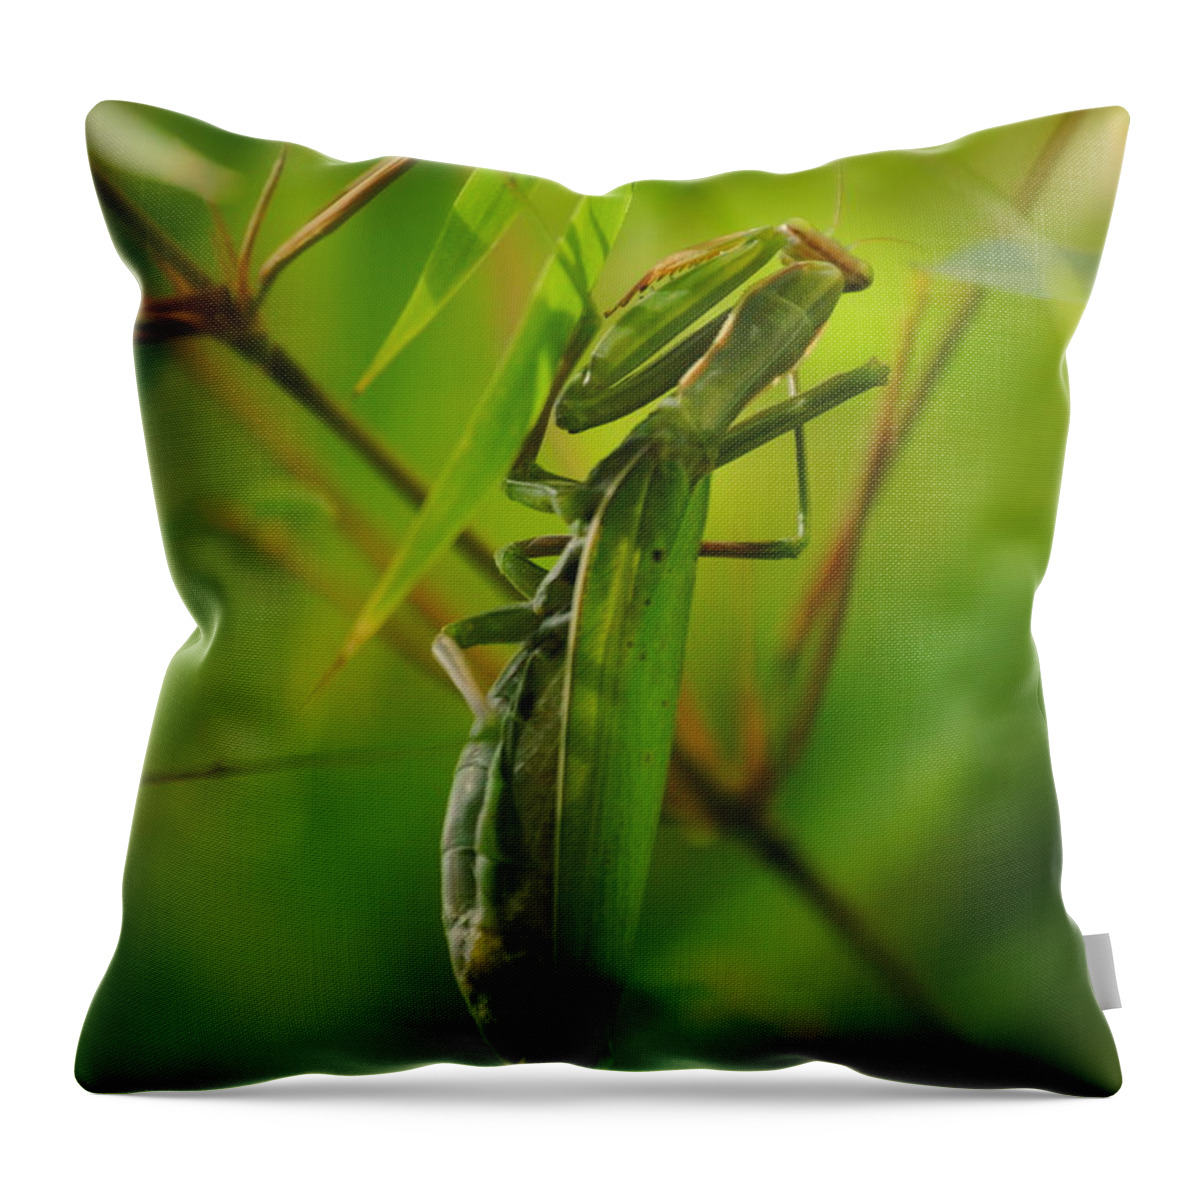 Mantis Throw Pillow featuring the photograph Mantis In Bamboo by Nathan Abbott